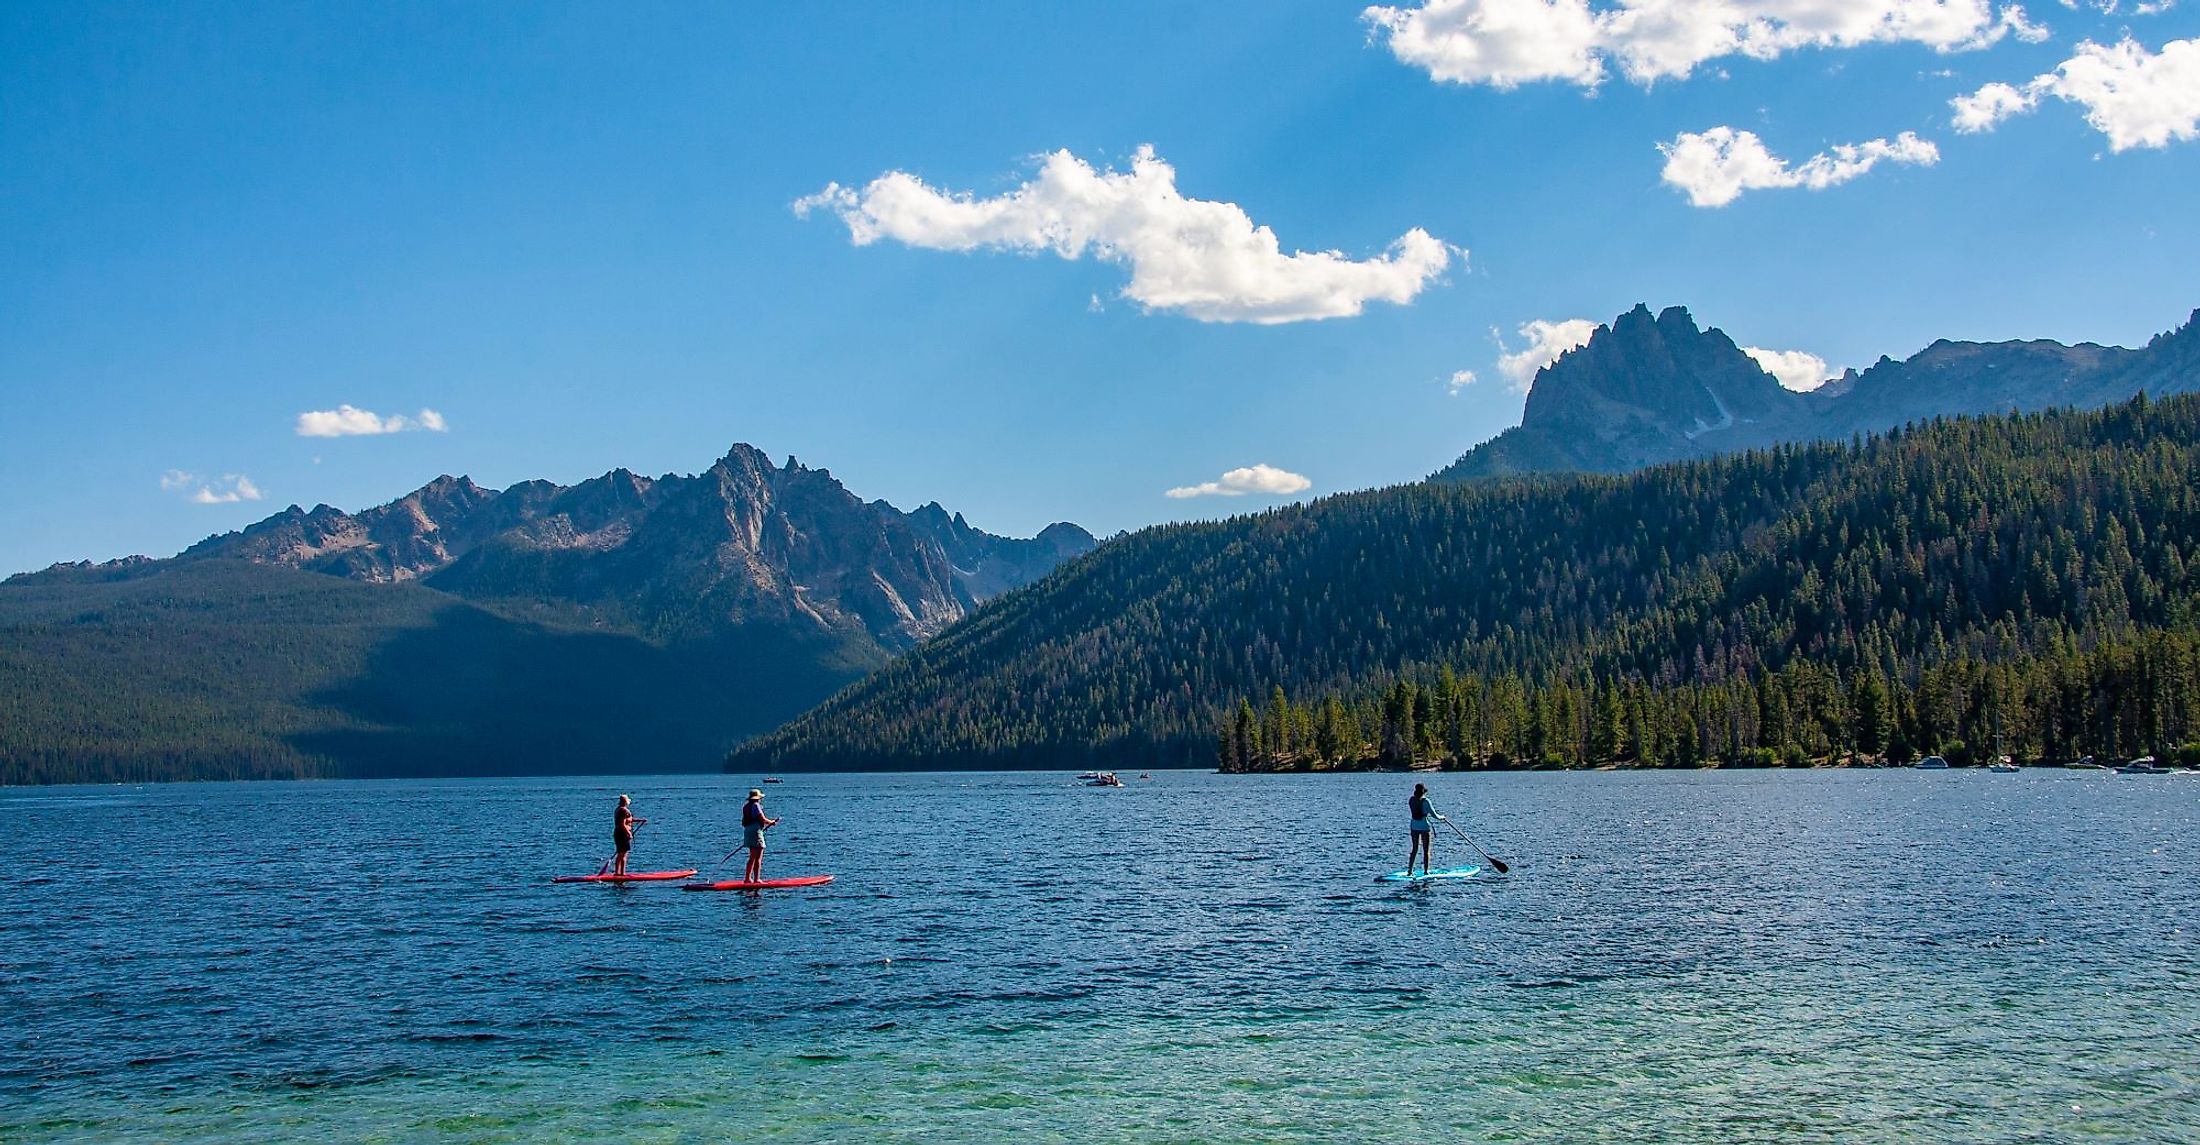 Paddle boarding on Redfish Lake in the Sawtooth Mountains in Idaho. 